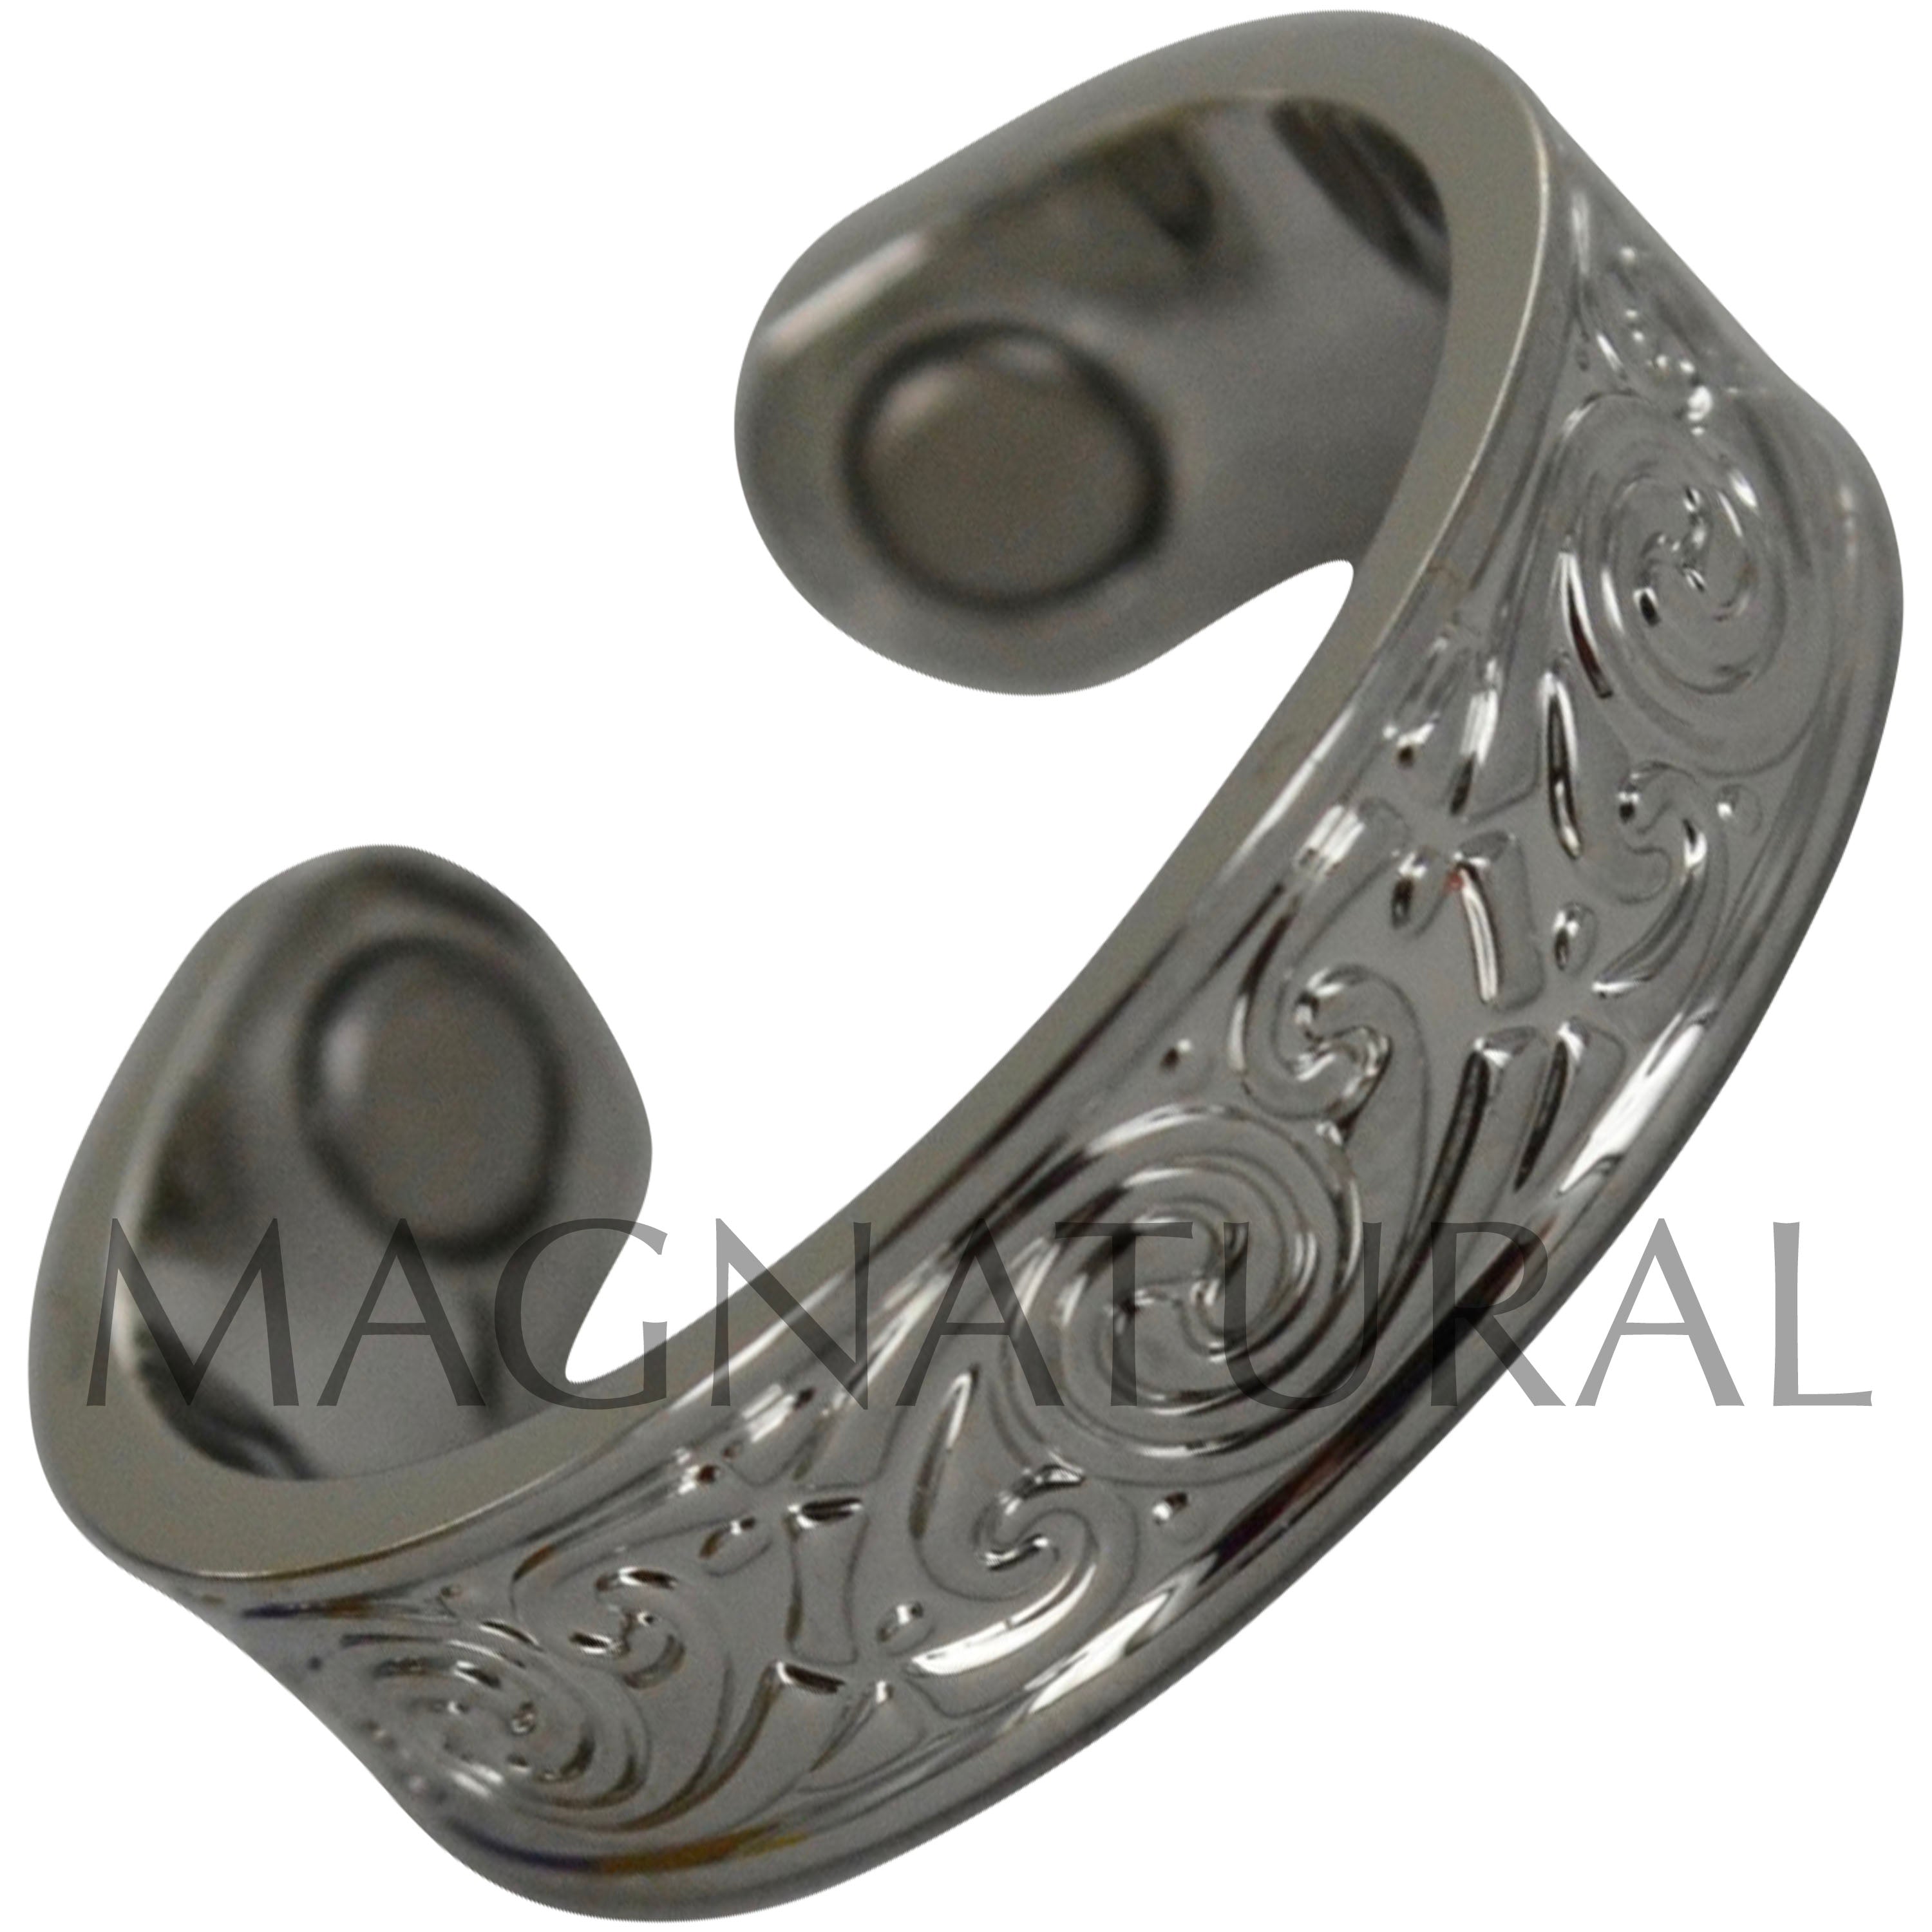 Magnetic Copper Ring - Silver Swirl